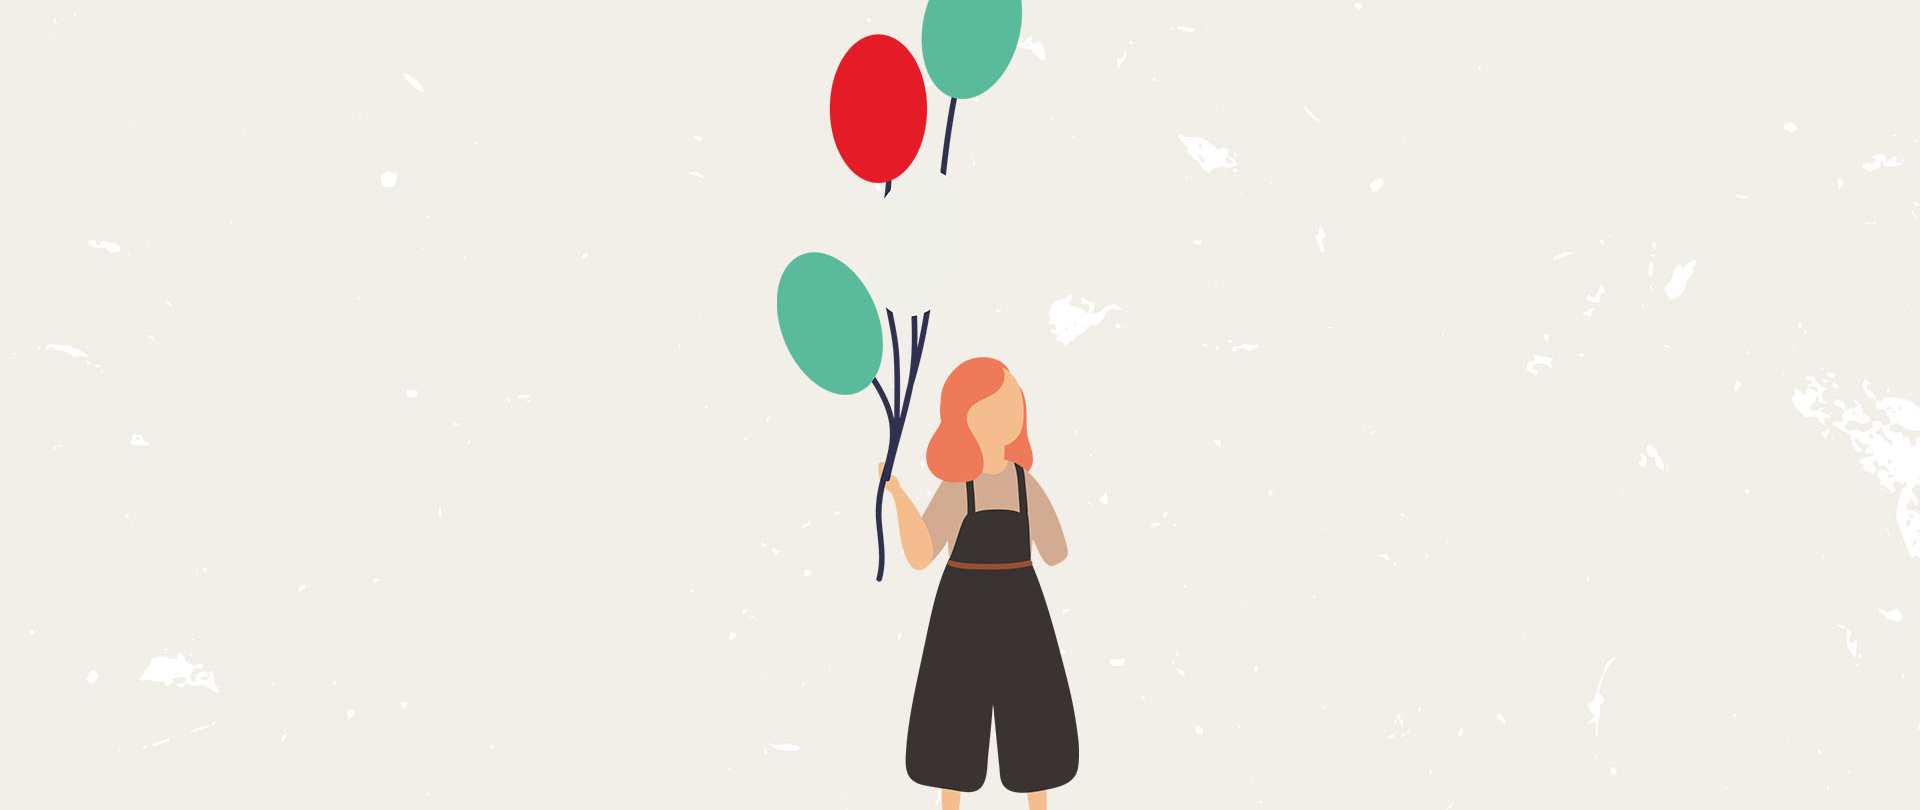 Woman carrying balloons illustration